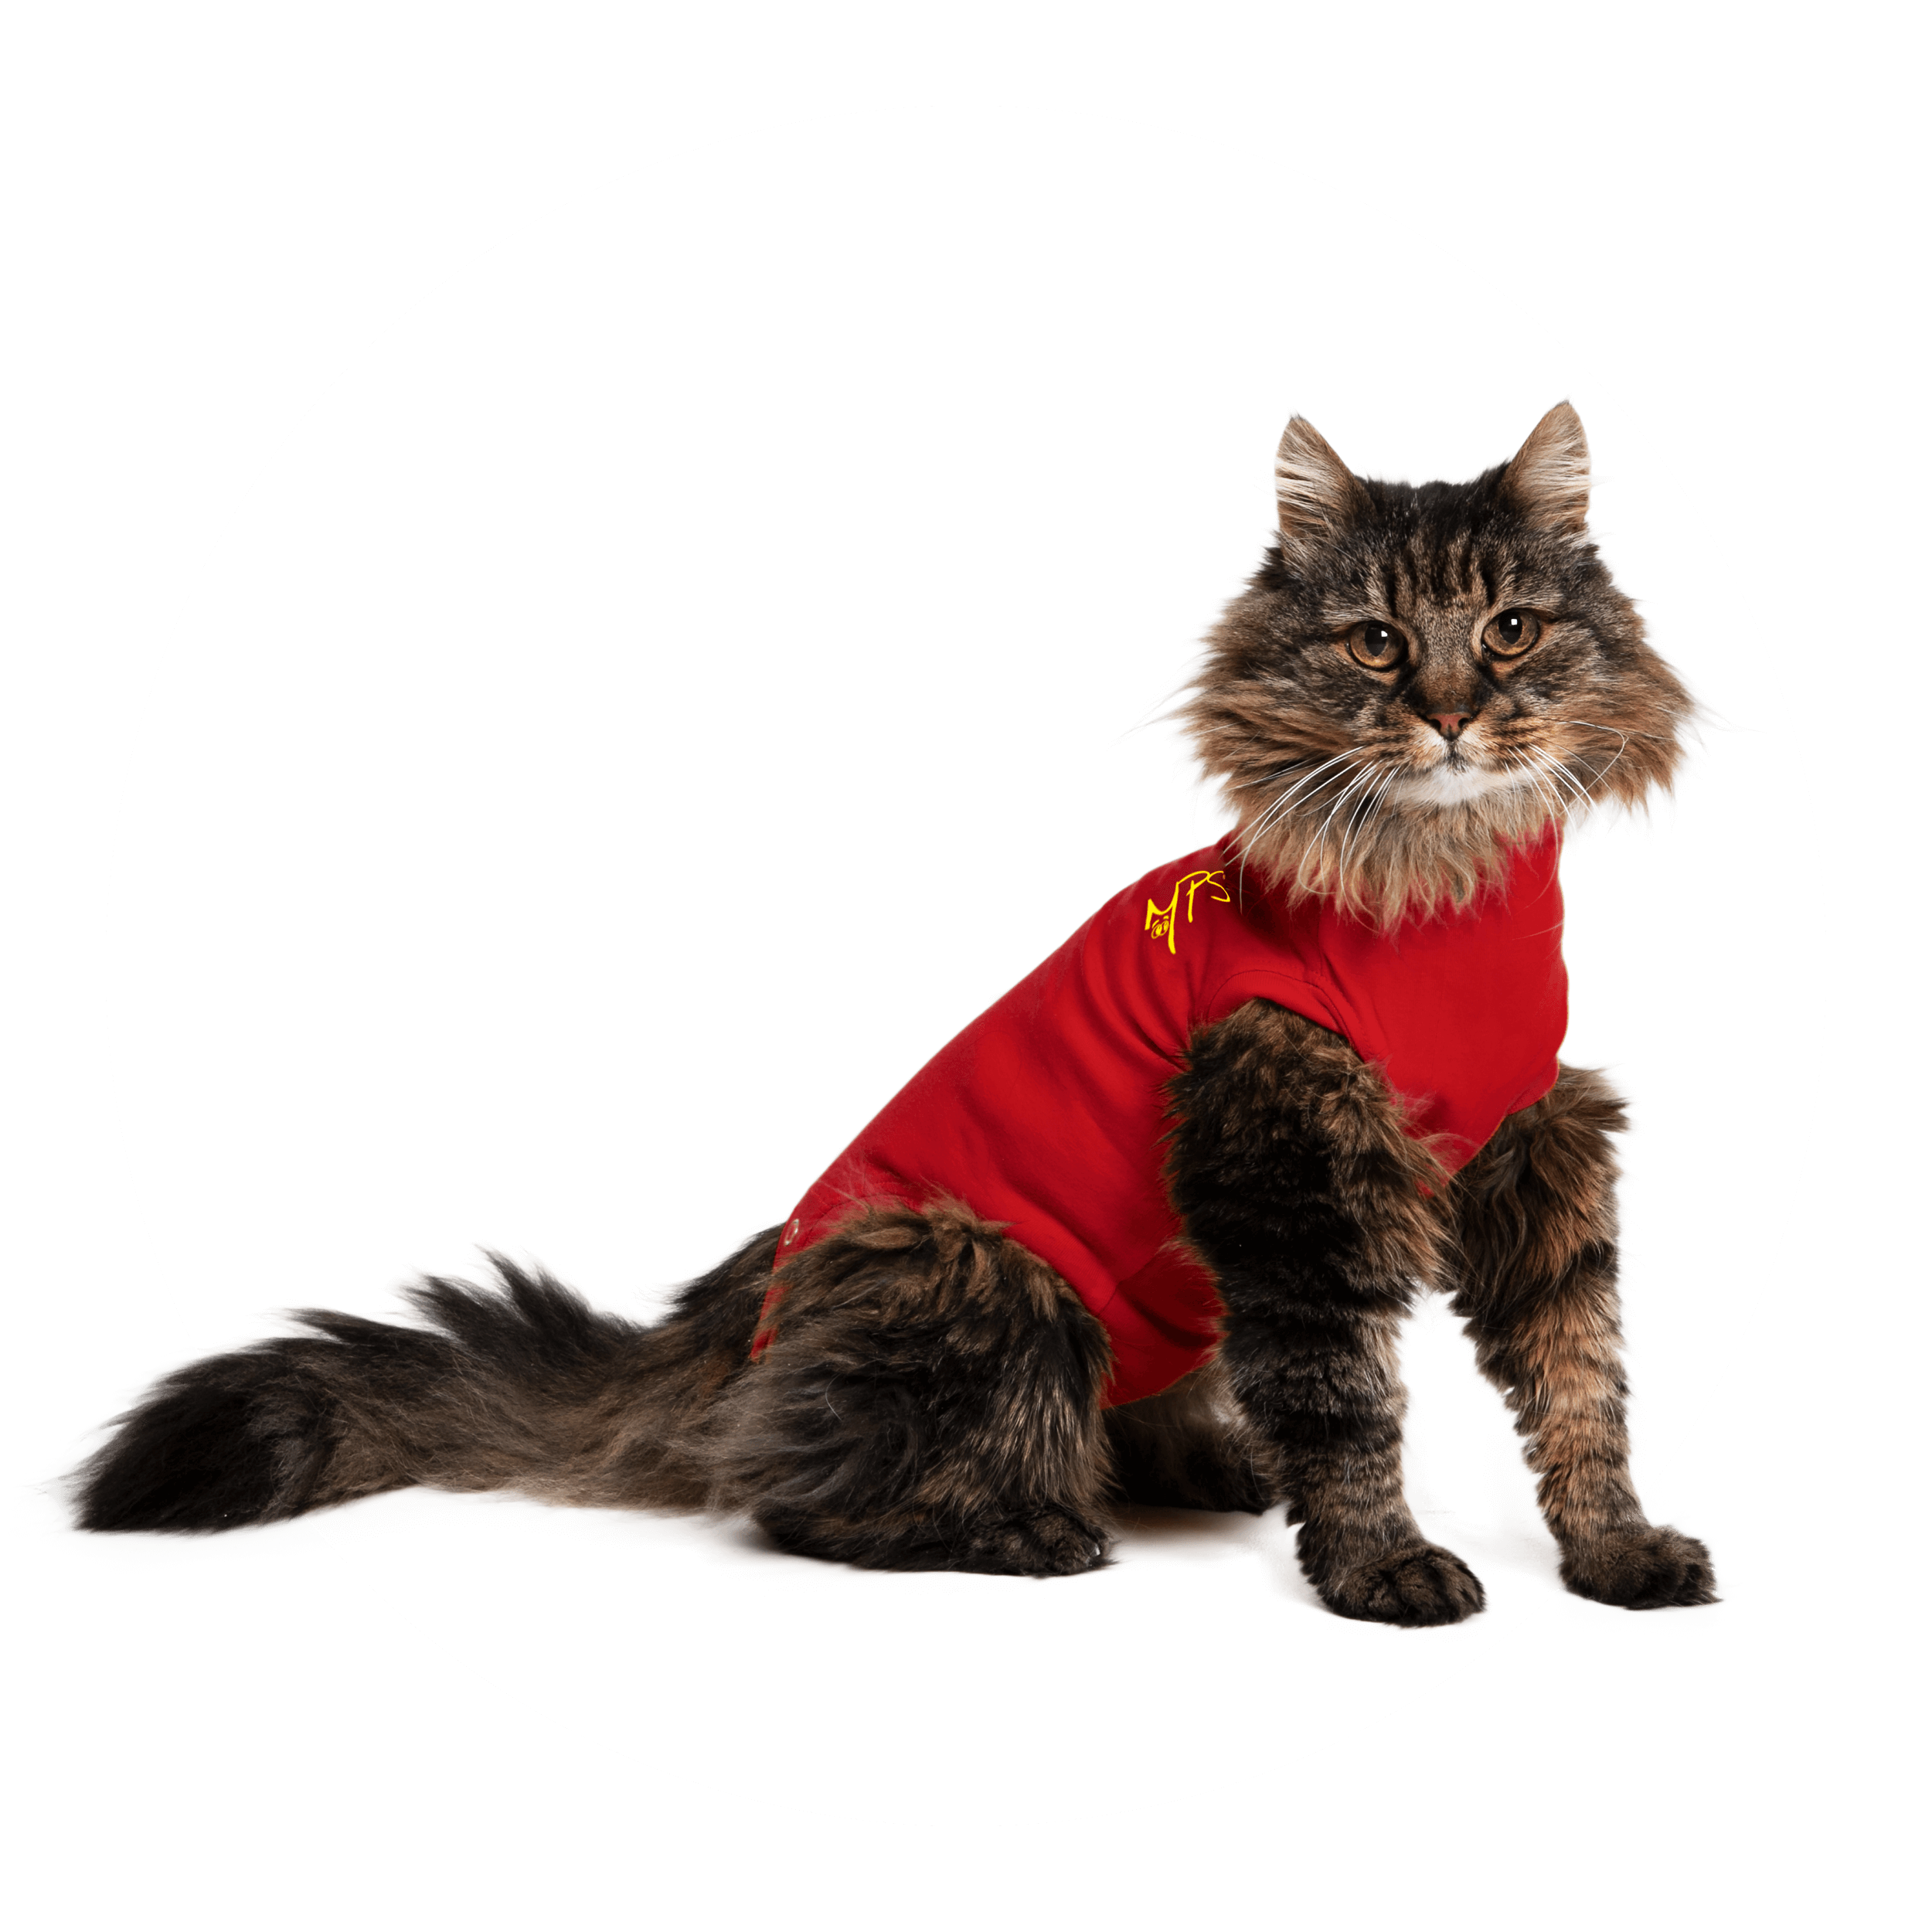 Medical Pet Shirts are great for cats after their spay operation